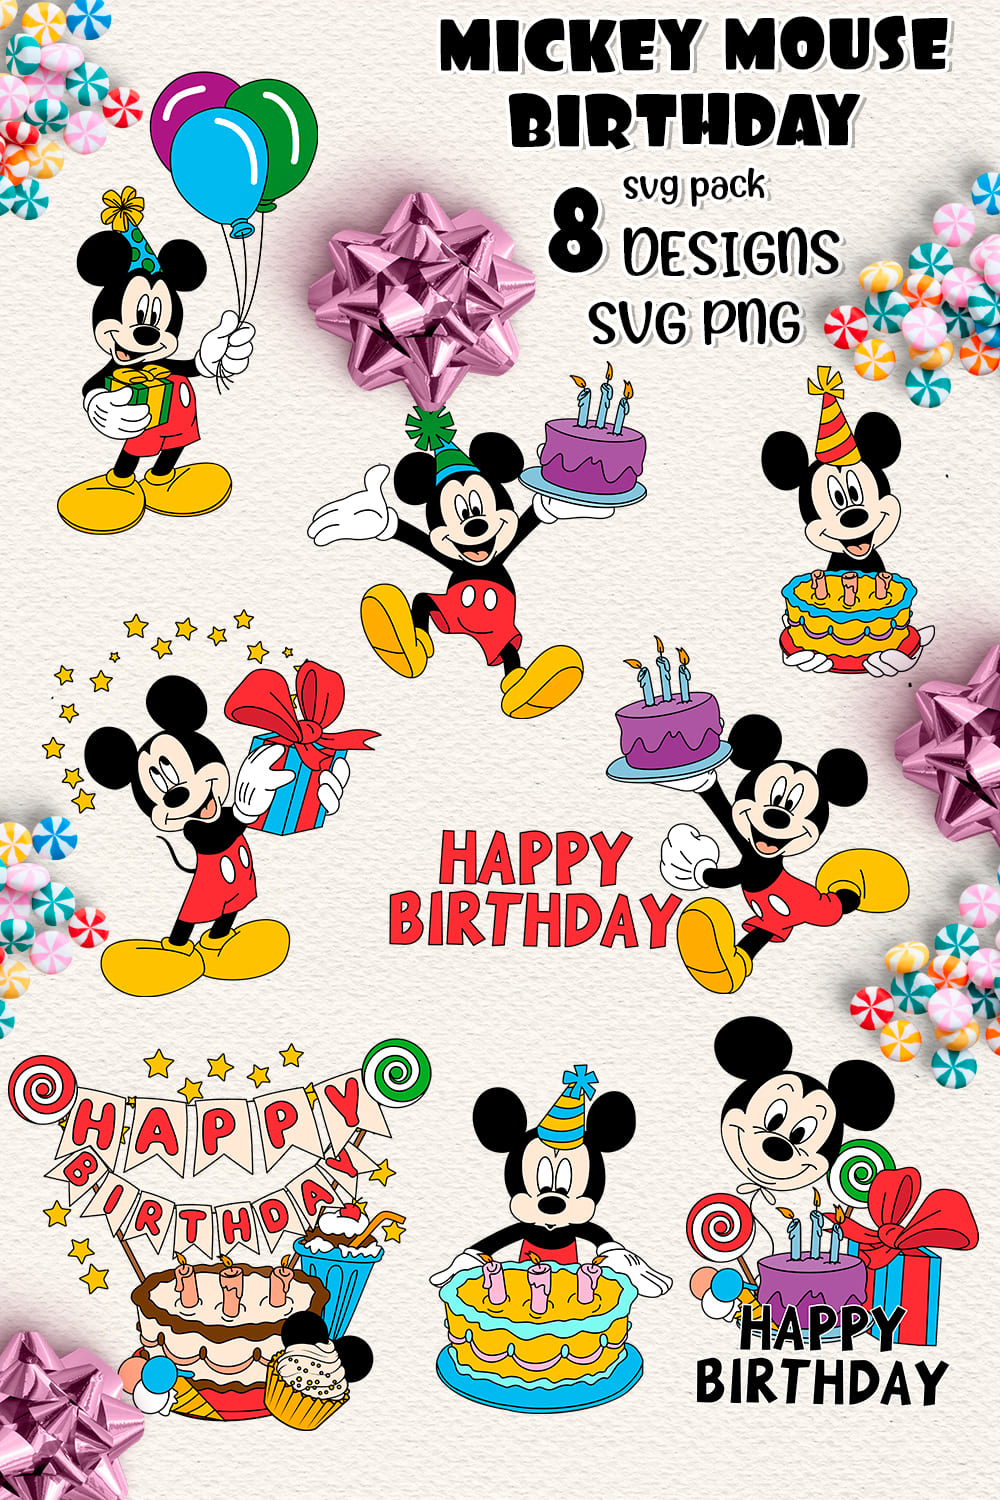 Mickey Mouse Birthday SVG - pinterest image preview.